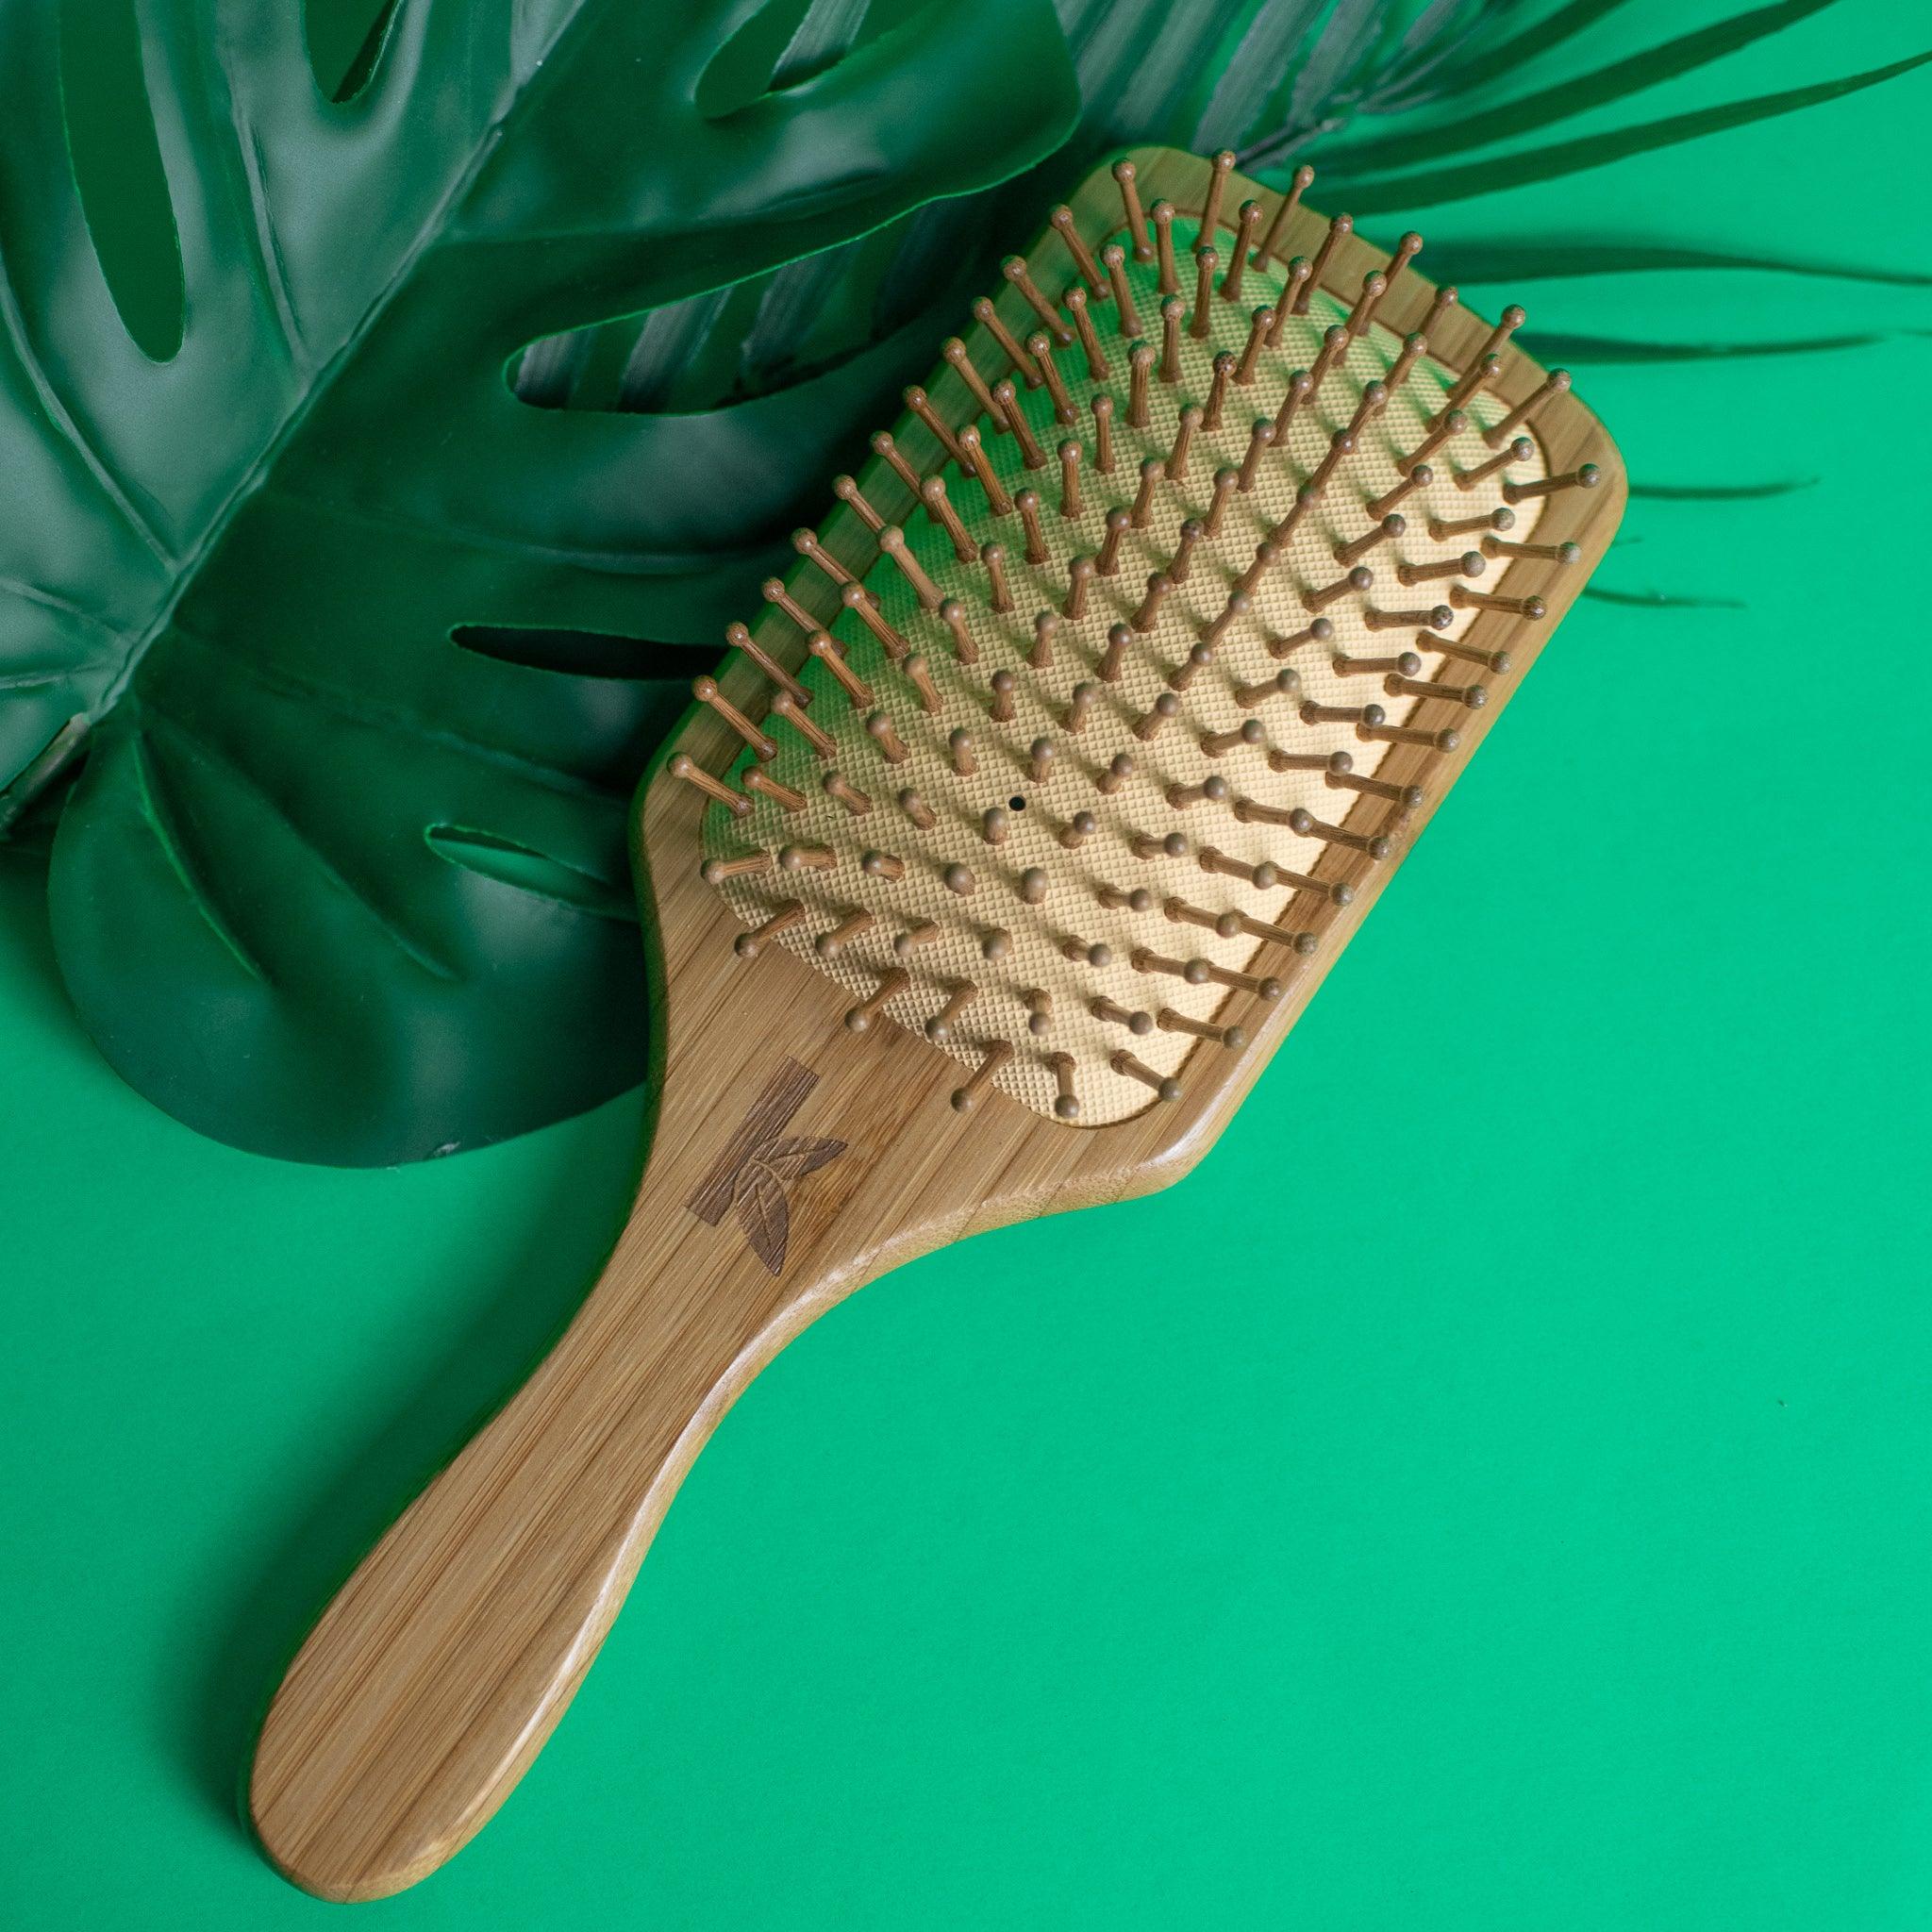 How to clean your hairbrush with baking soda, shampoo and tree oil